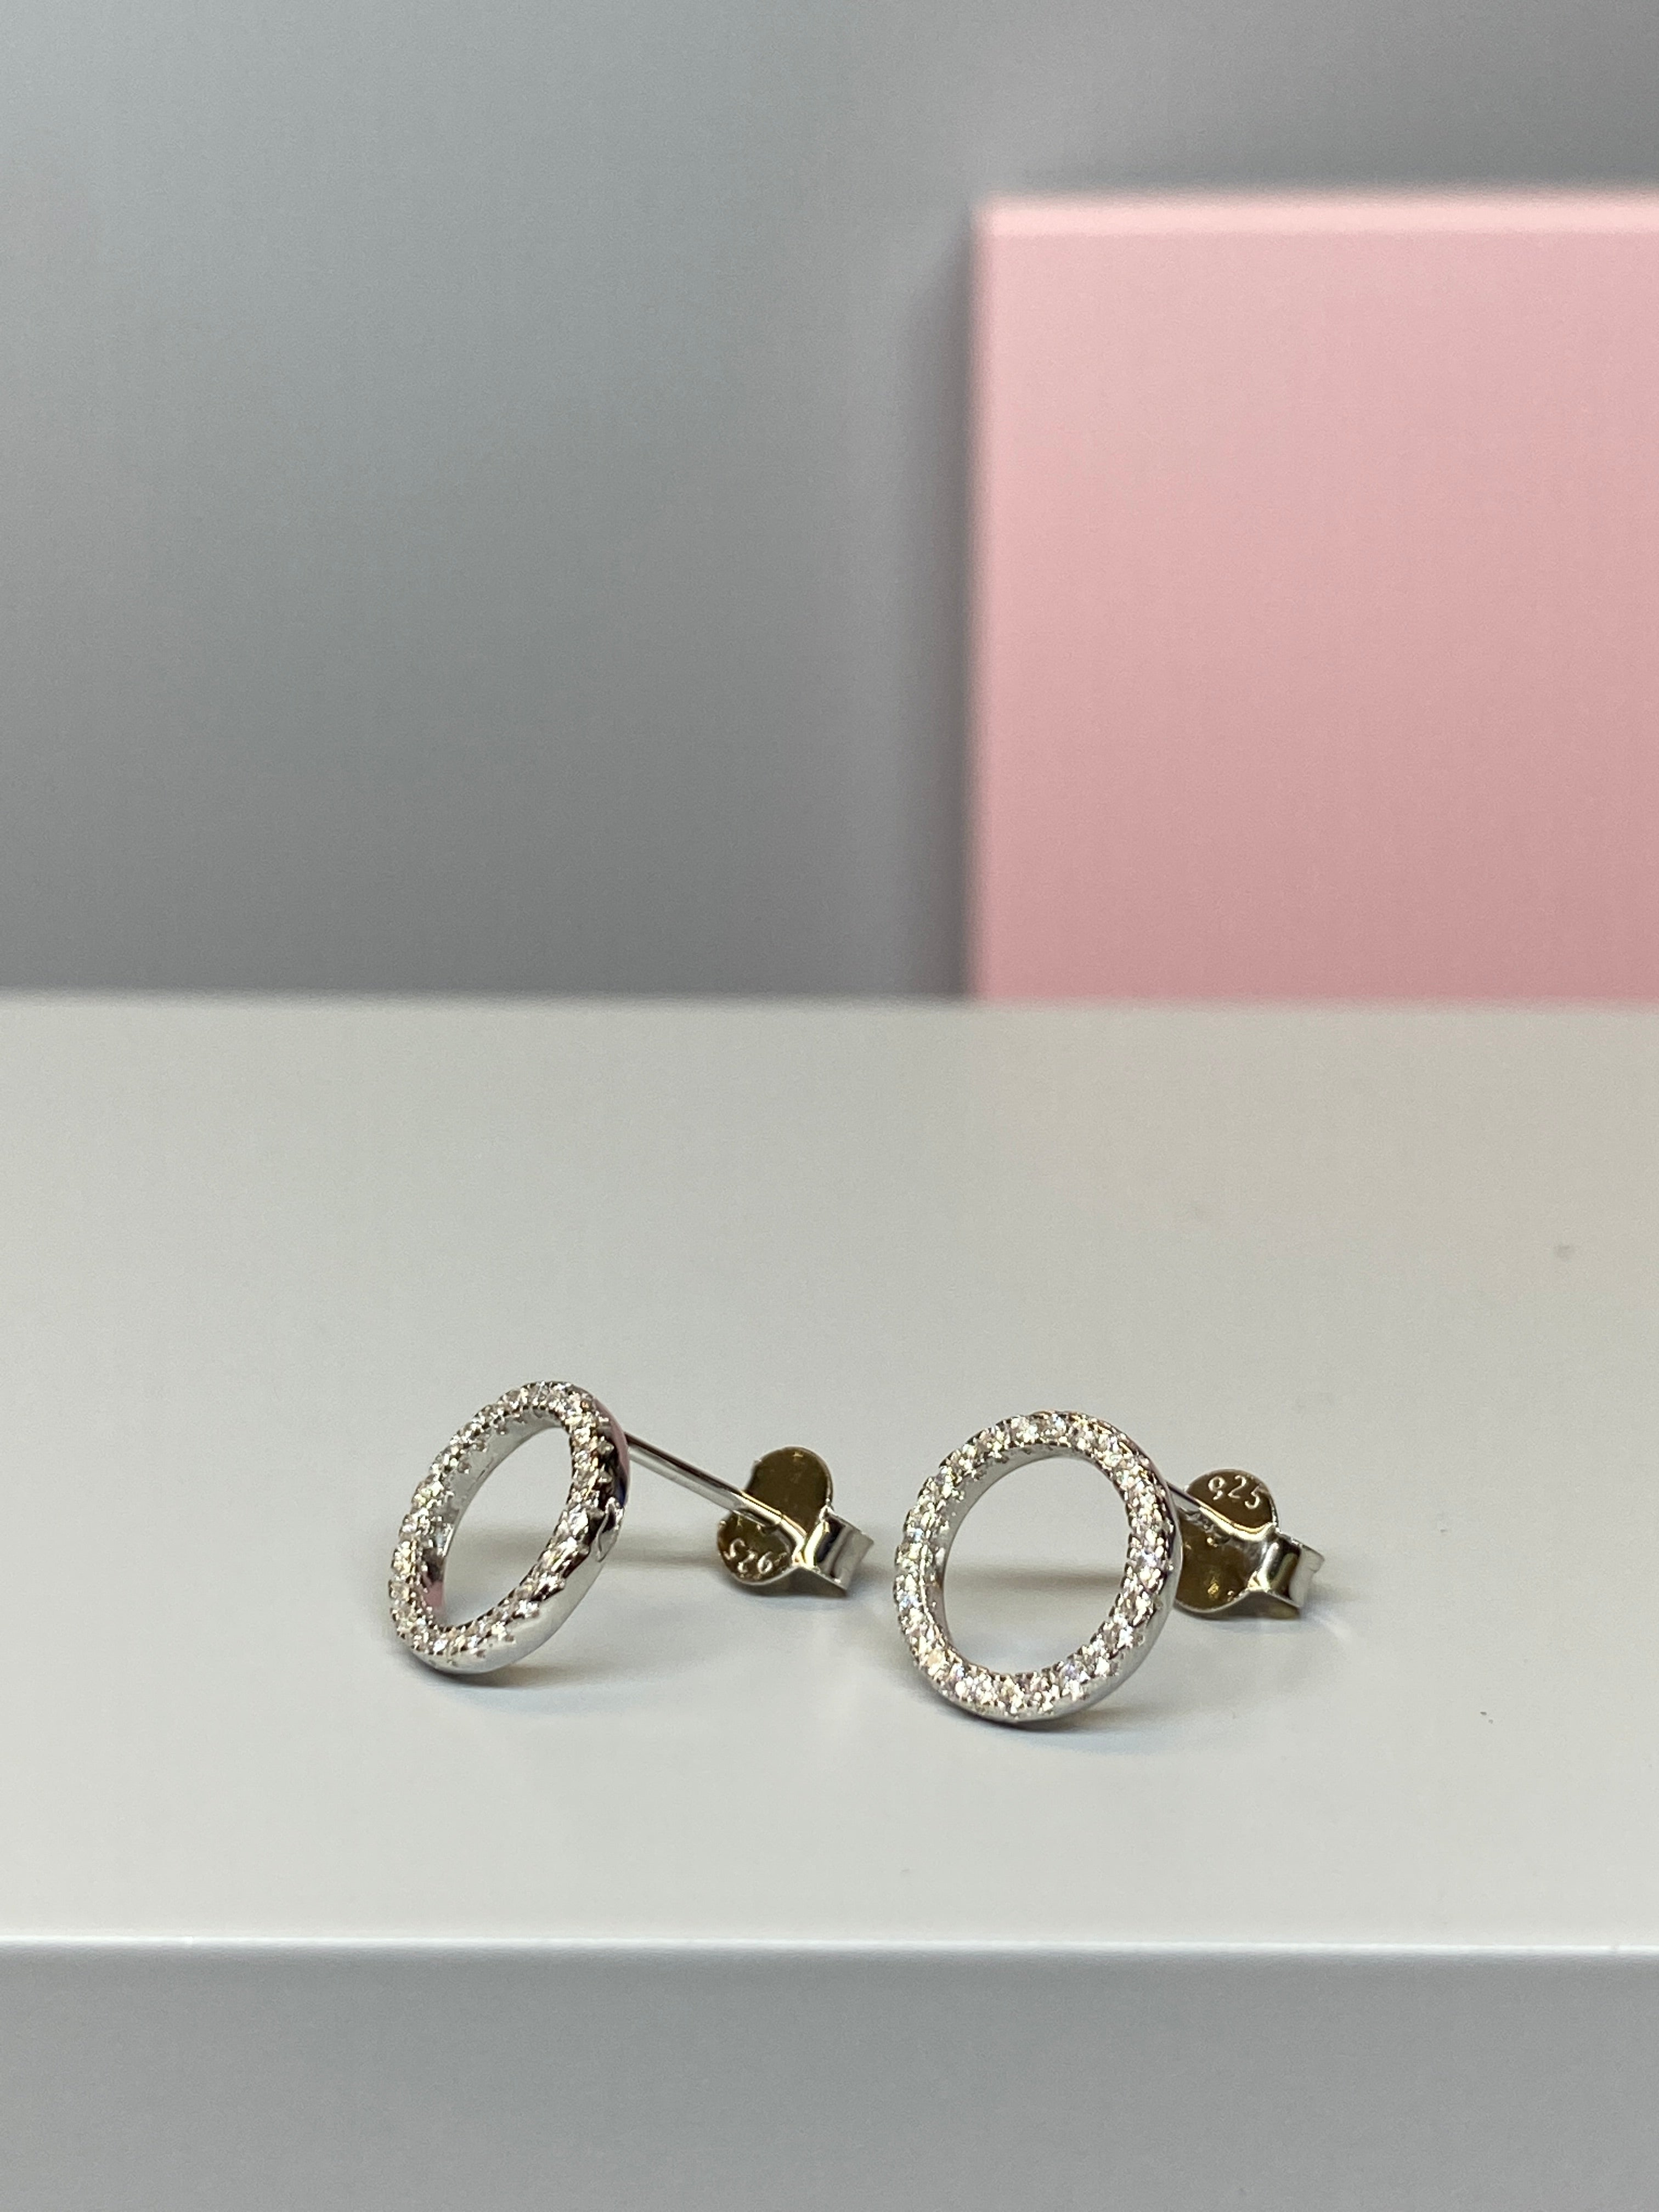 Sterling Silver CZ Circle Earrings - 10mm - Hallmark Jewellers Formby & The Jewellers Bench Widnes